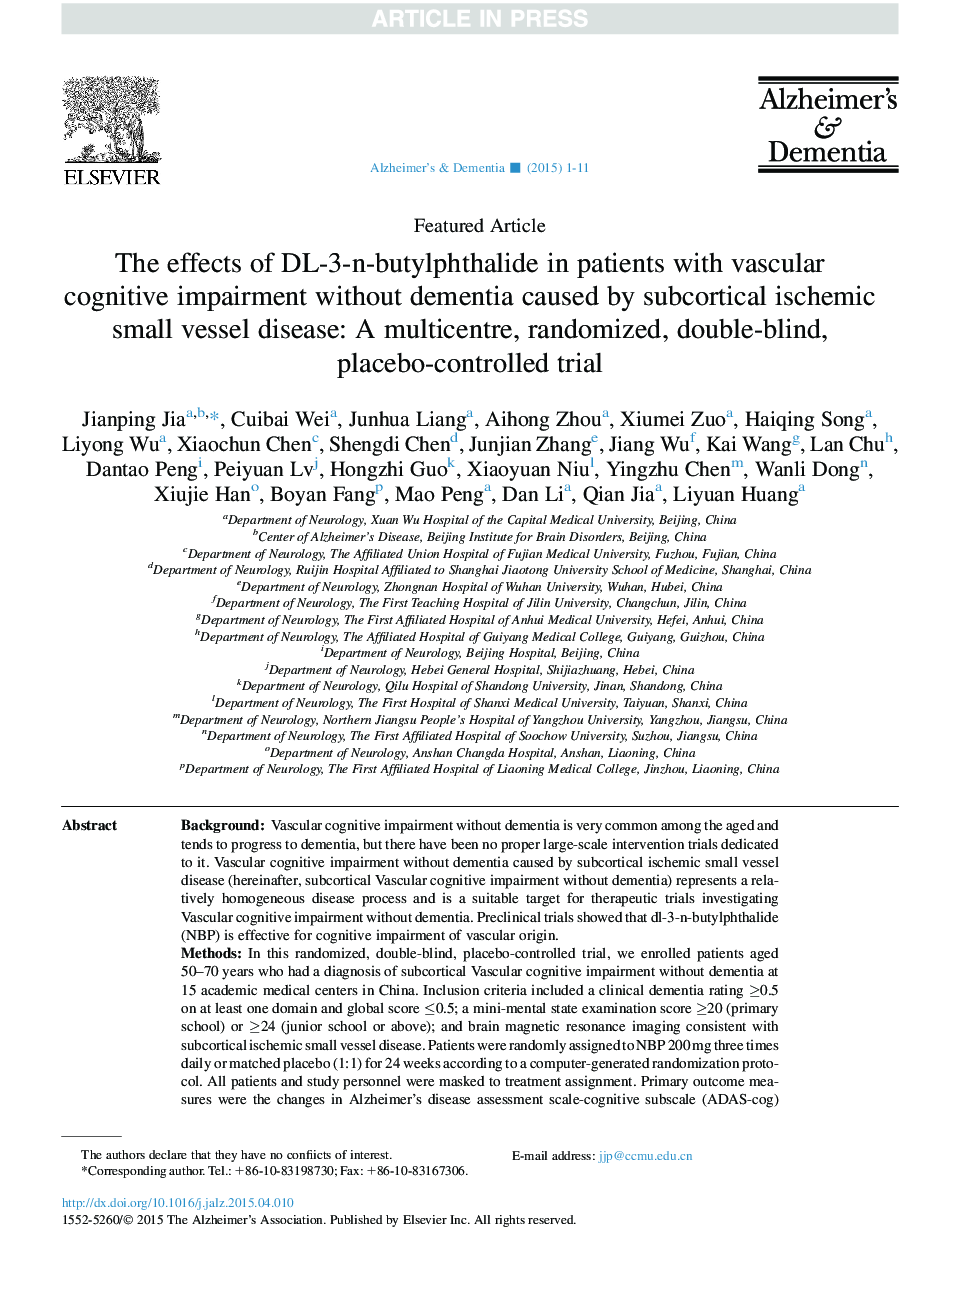 The effects of DL-3-n-butylphthalide in patients with vascular cognitive impairment without dementia caused by subcortical ischemic small vessel disease: A multicentre, randomized, double-blind, placebo-controlled trial